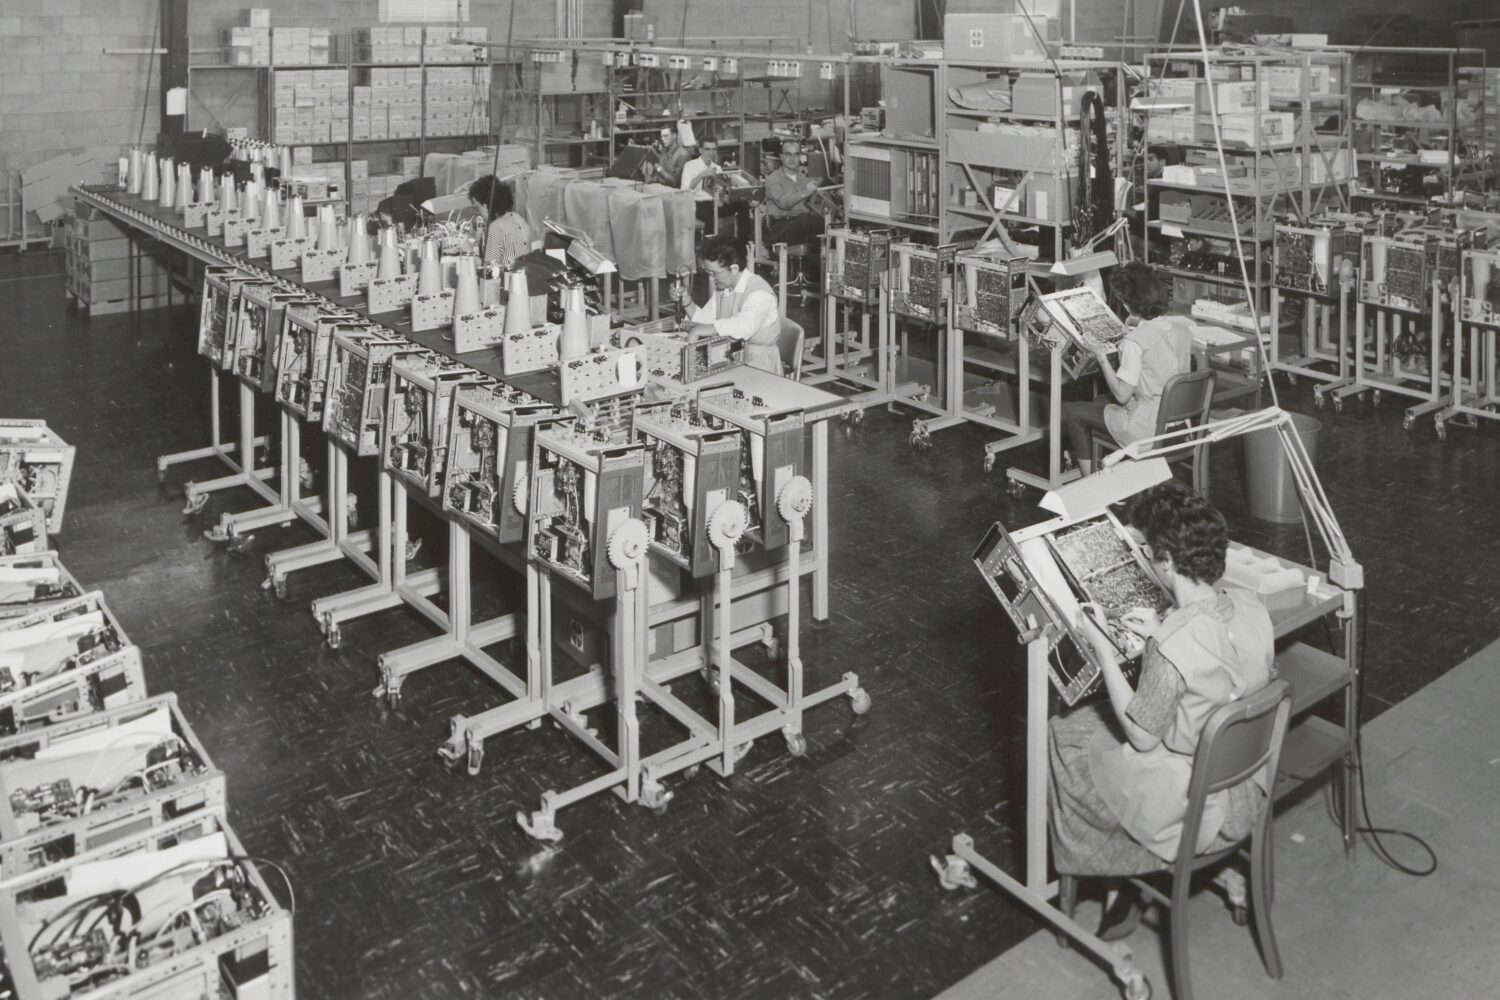 Production line for oscilloscopes at Hewlett-Packard's Colorado Springs facility in 1963.